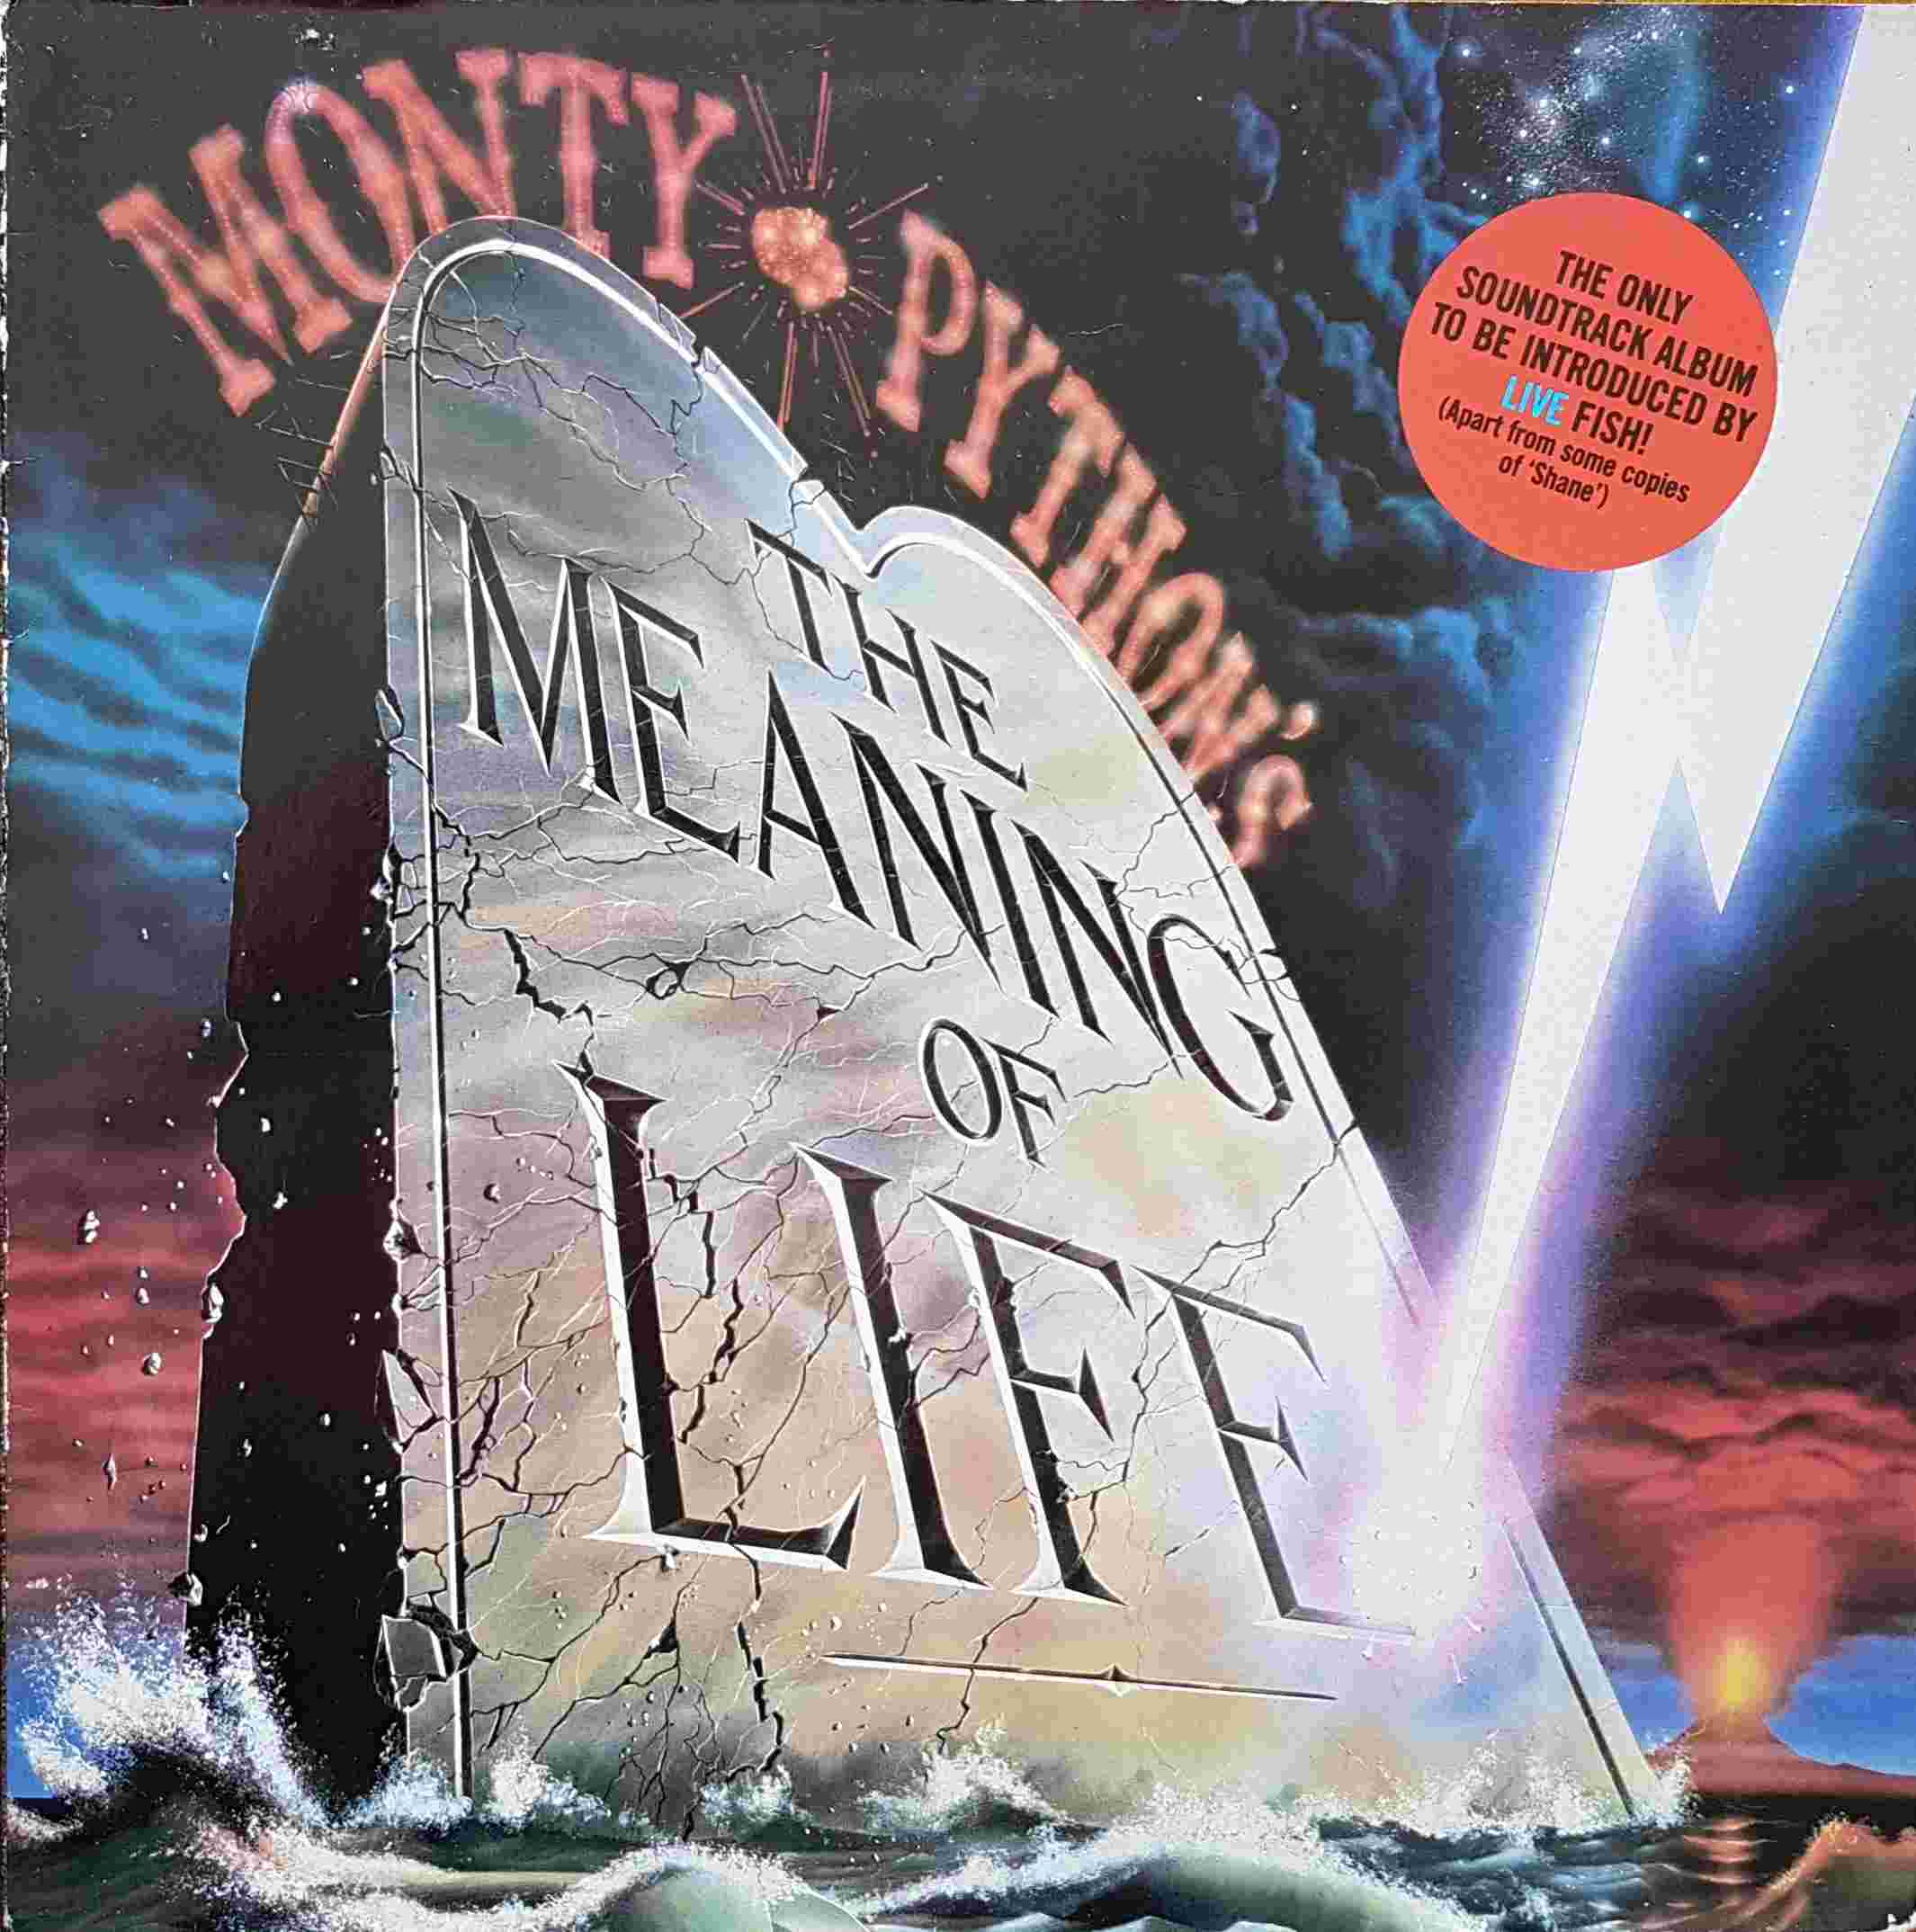 Picture of The meaning of life by artist Monty Python from the BBC albums - Records and Tapes library